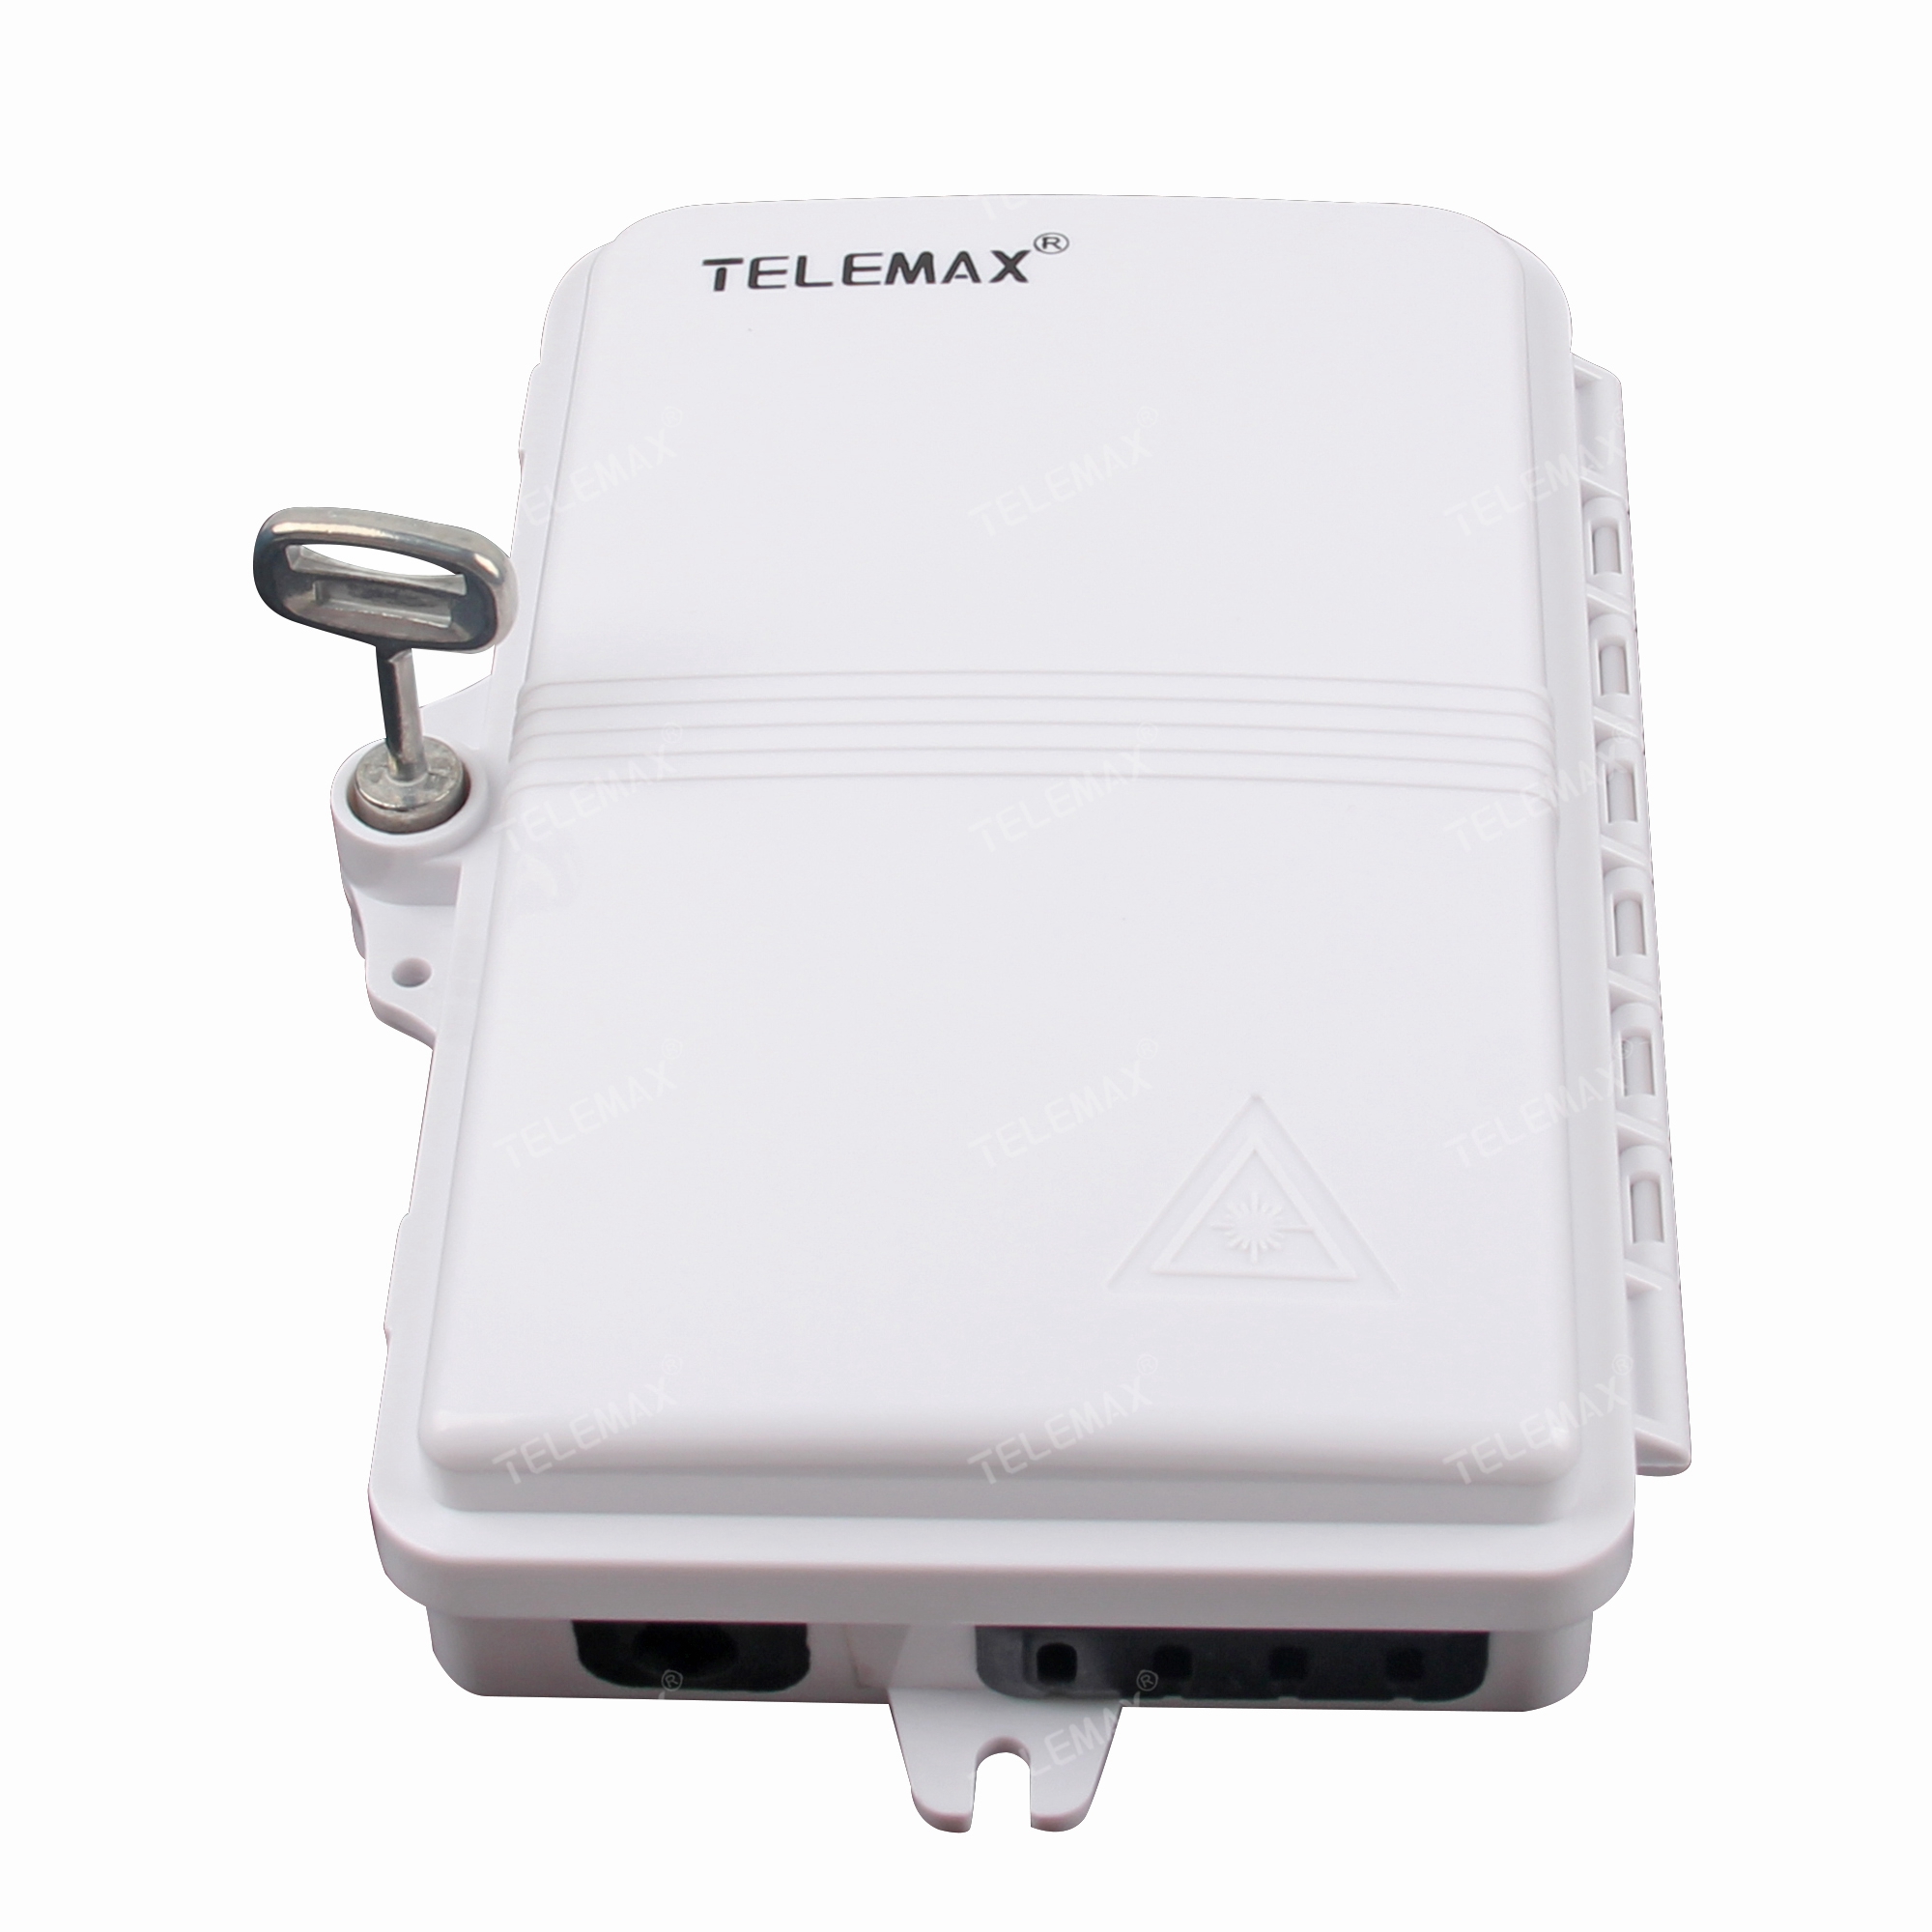 IP65 4F FTTH BOX ABS Material, Support 4 SC Simplex or 4 LC Duplex.